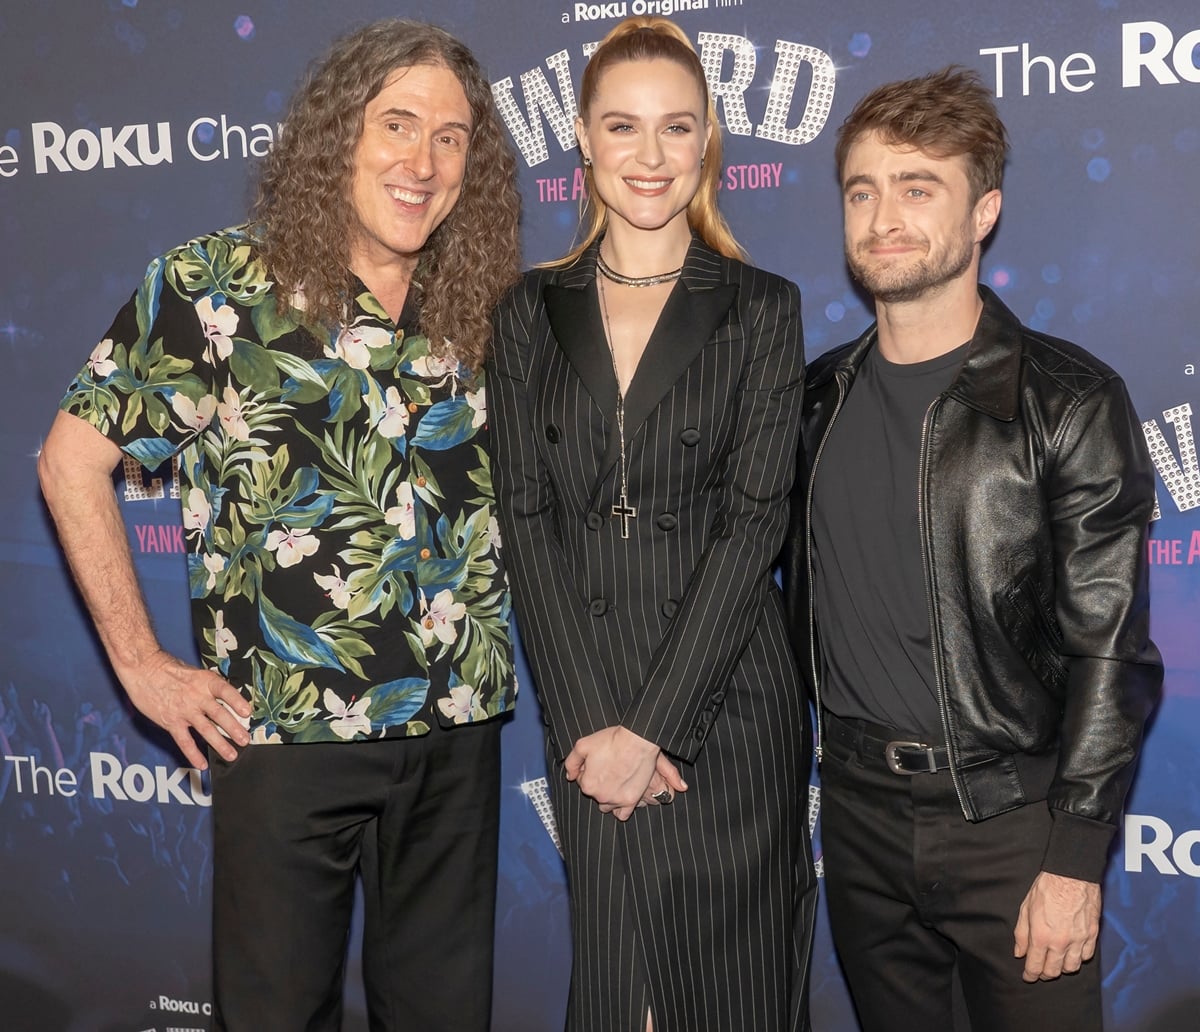 Evan Rachel Wood is 5 feet 6 ¼ inches tall (168.3 cm), Weird Al Yankovic is the tallest among them at 6 feet (182.9 cm), while Daniel Radcliffe is the shortest at 5 feet 4 ½ inches (163.8 cm)